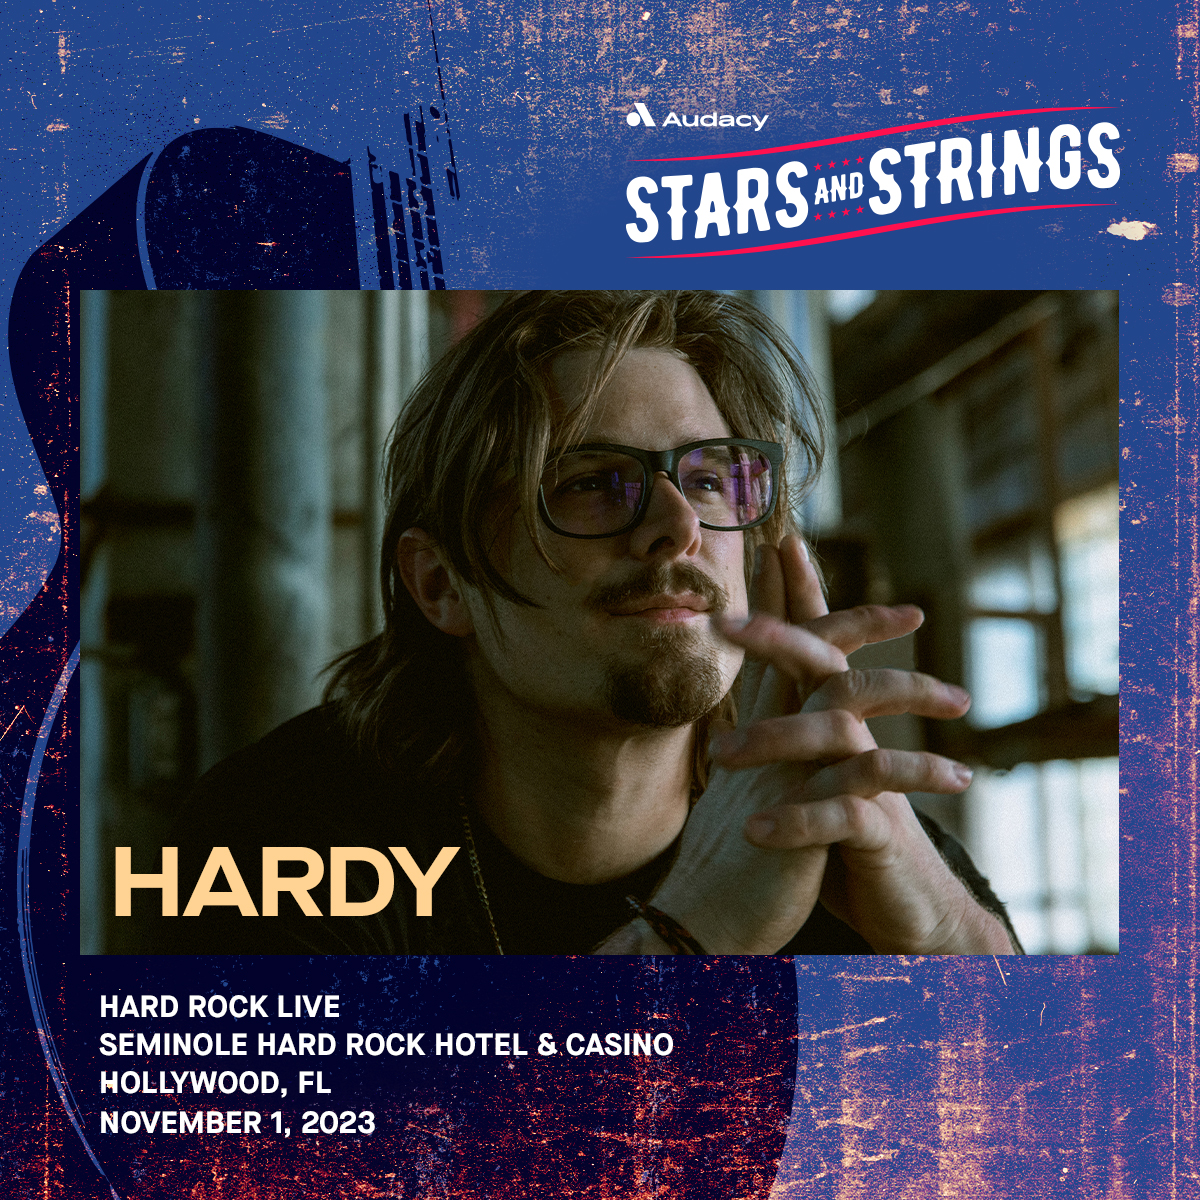 HARDY at 'Stars and Strings'